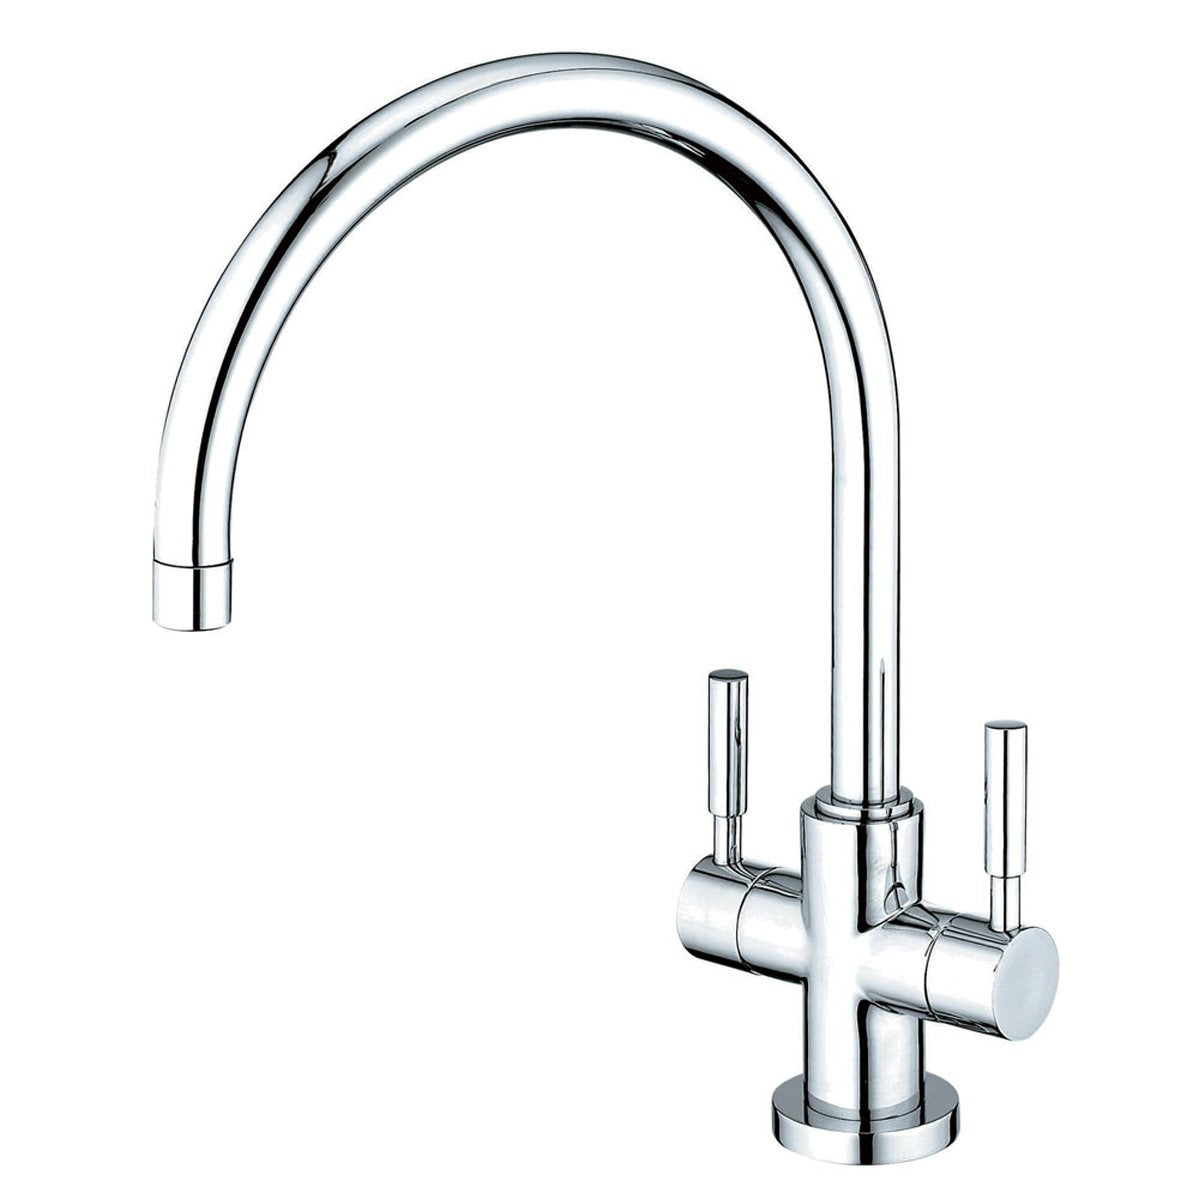 Kingston Brass Concord Double Handle Kitchen Faucet in Polished Chrome-Kitchen Faucets-Free Shipping-Directsinks.